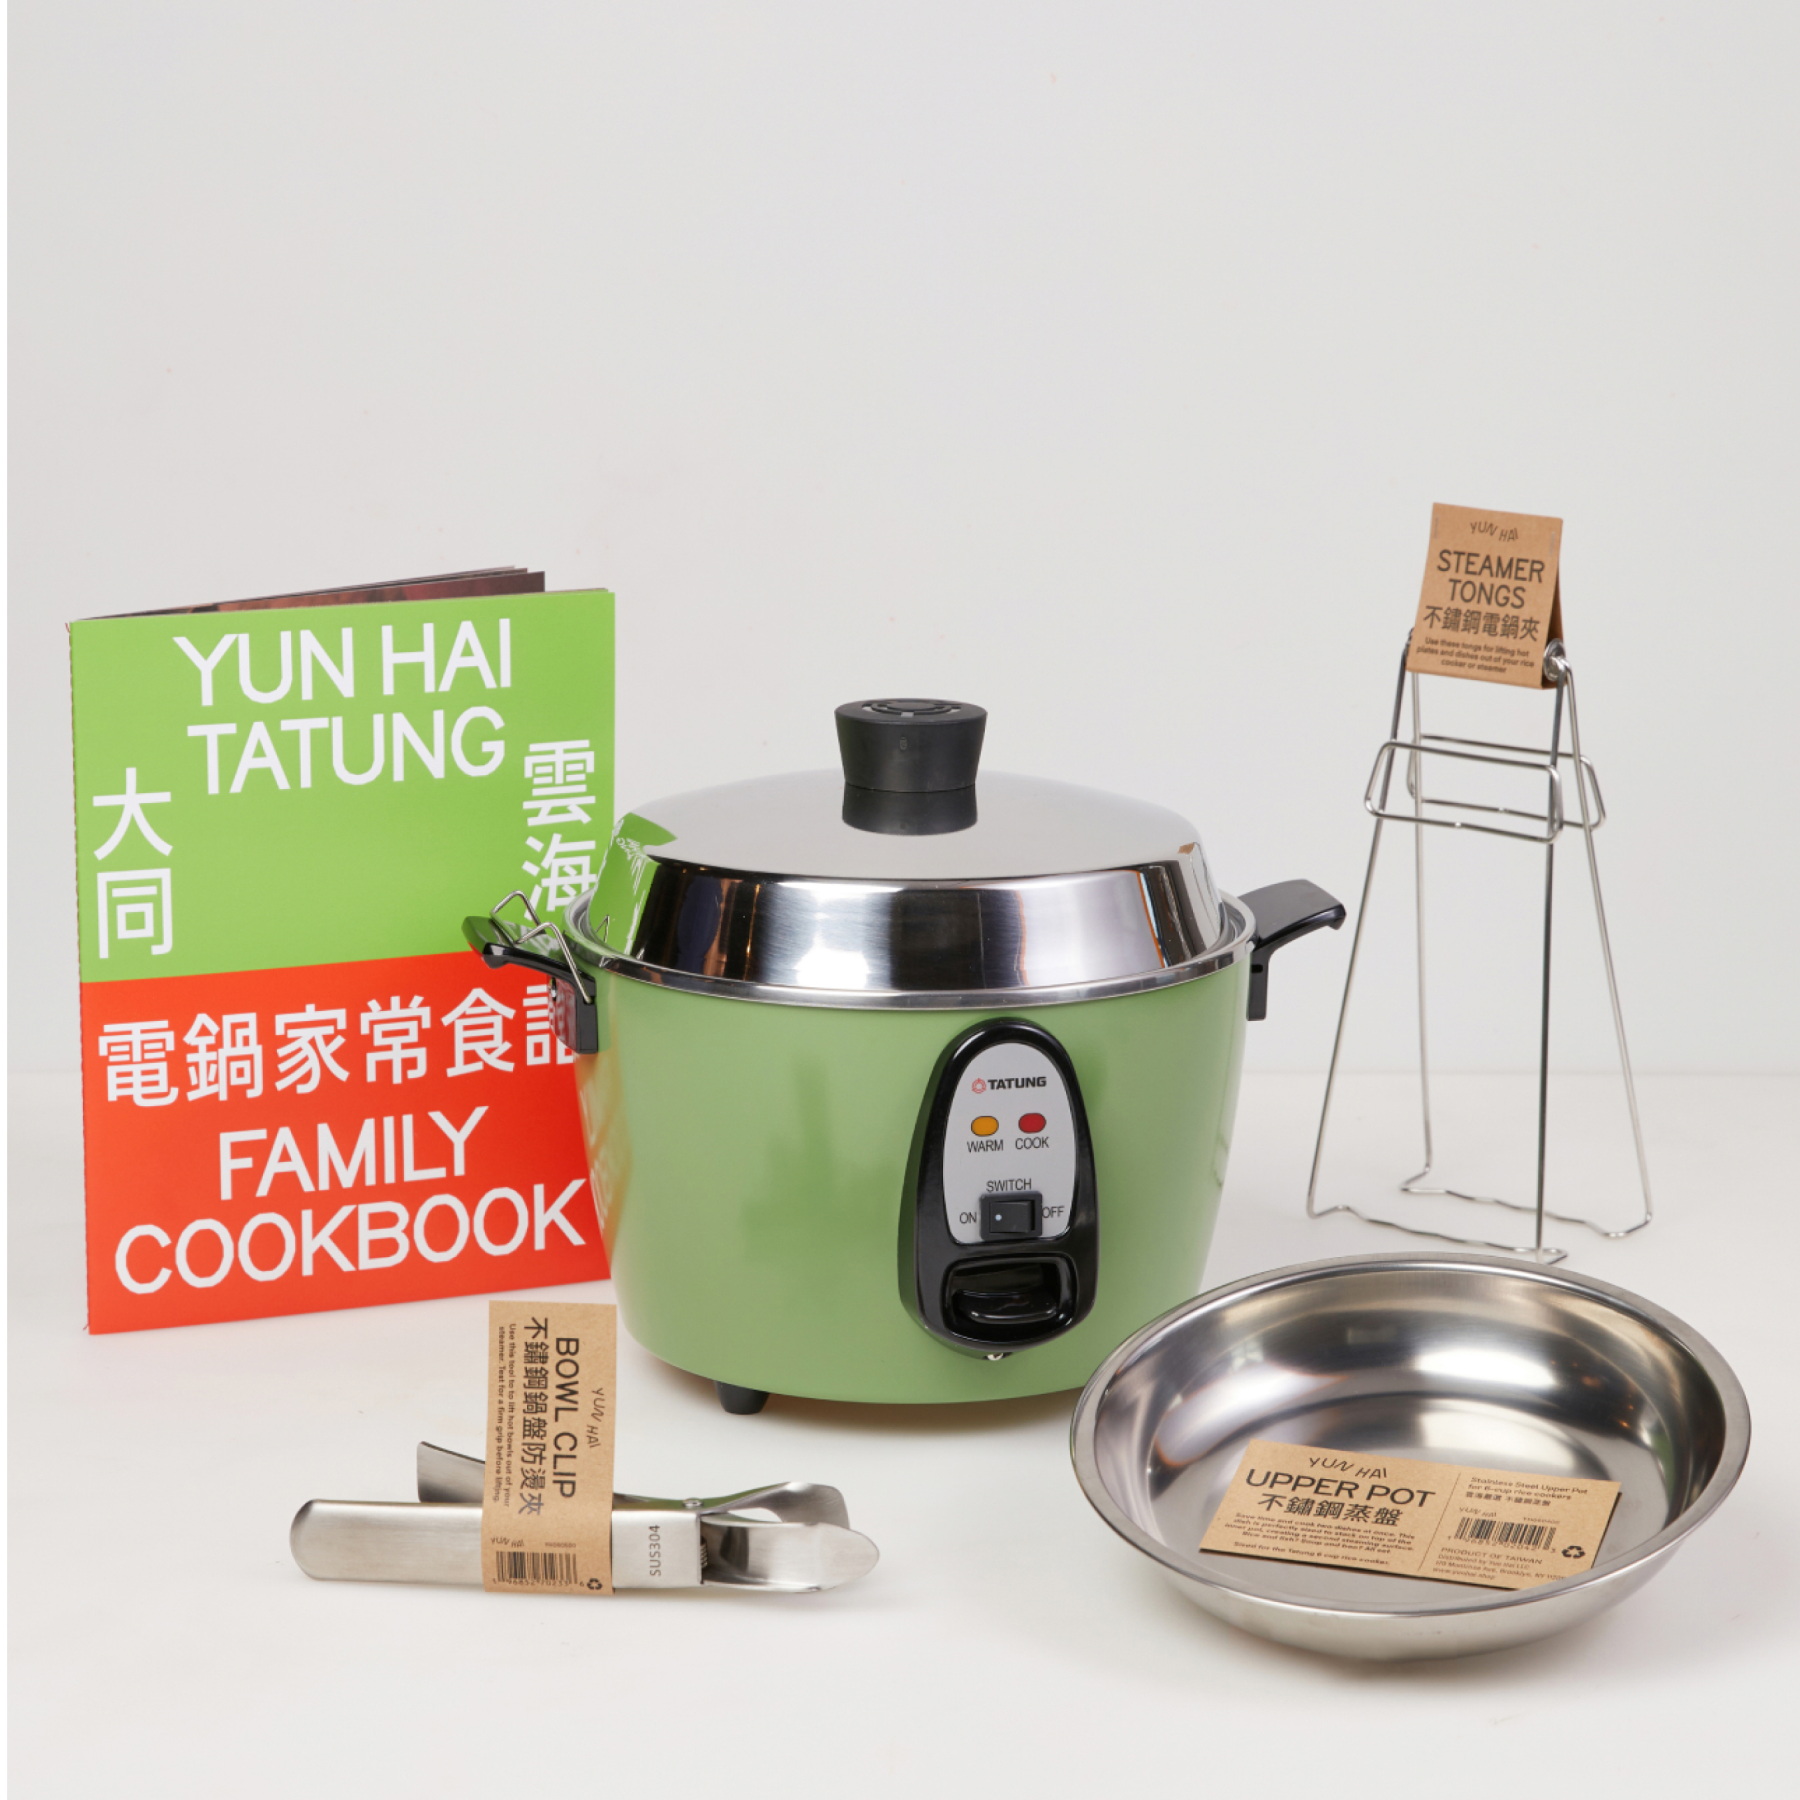 TATUNG Indirect Multi-Functional Mini Rice Cooker, Steamer and Warmer